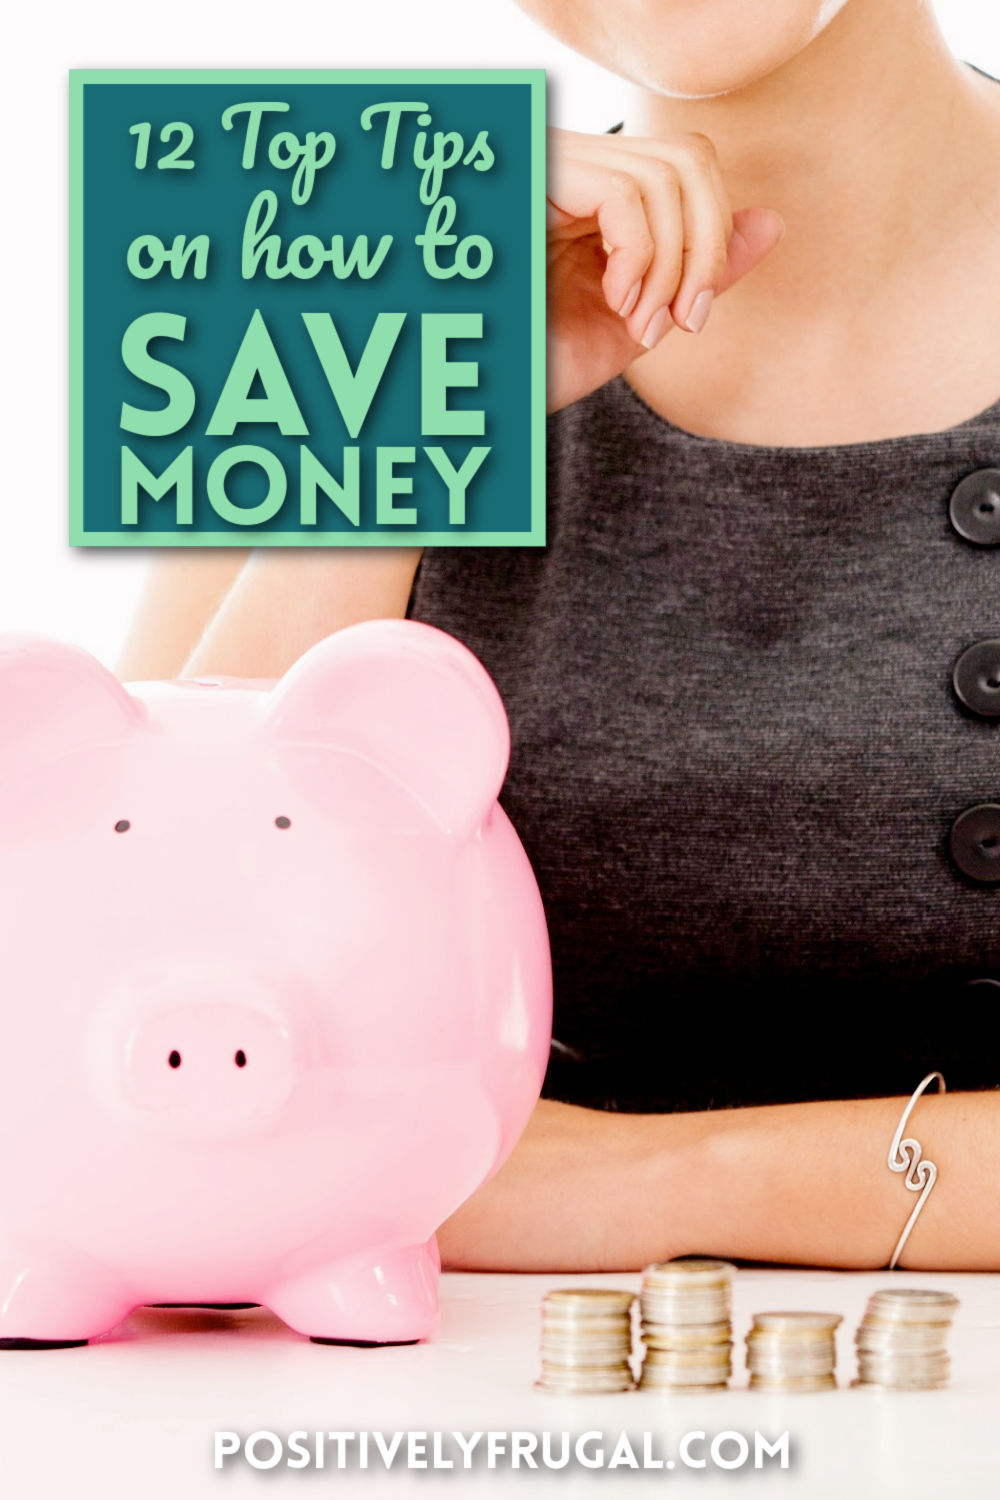 How To Save Money Tips by PositivelyFrugal.com